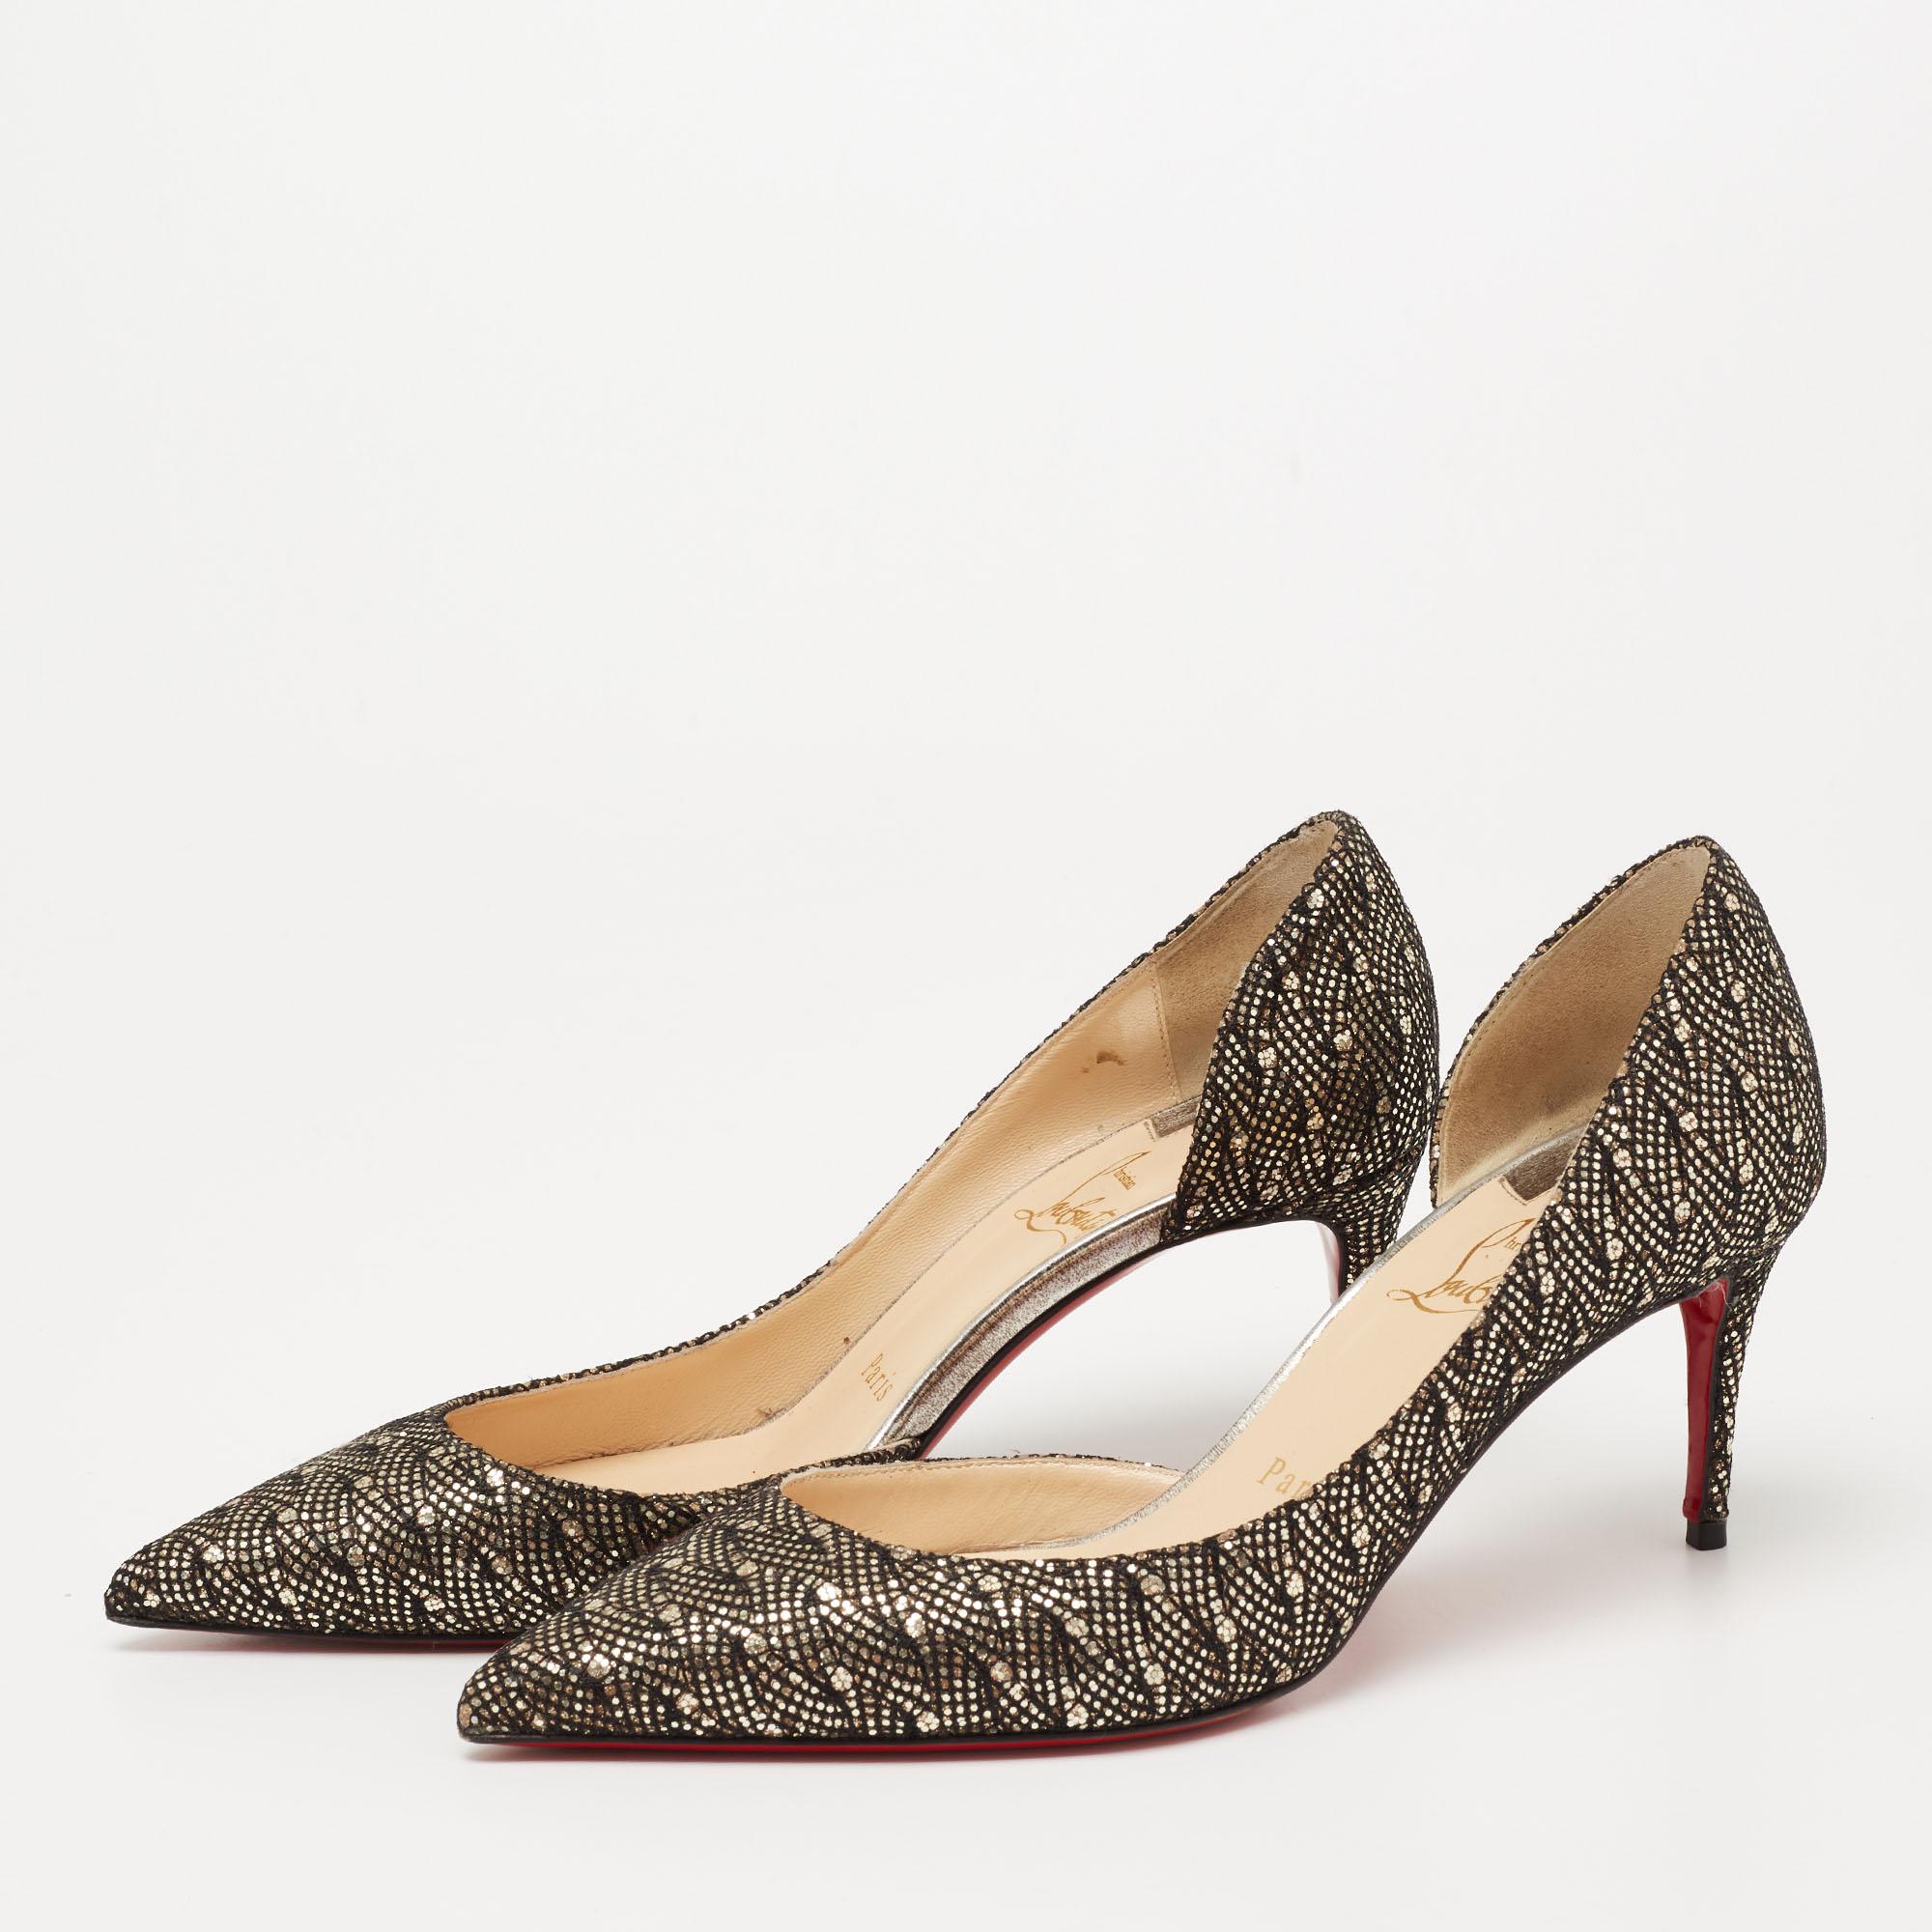 Skilfully crafted from lurex fabric in a D'orsay style with pointed toes, these Christian Louboutin pumps come ready to give you a high-fashion experience. The classic pumps, with sharp-cut toplines, are balanced on 7 cm heels and finished with